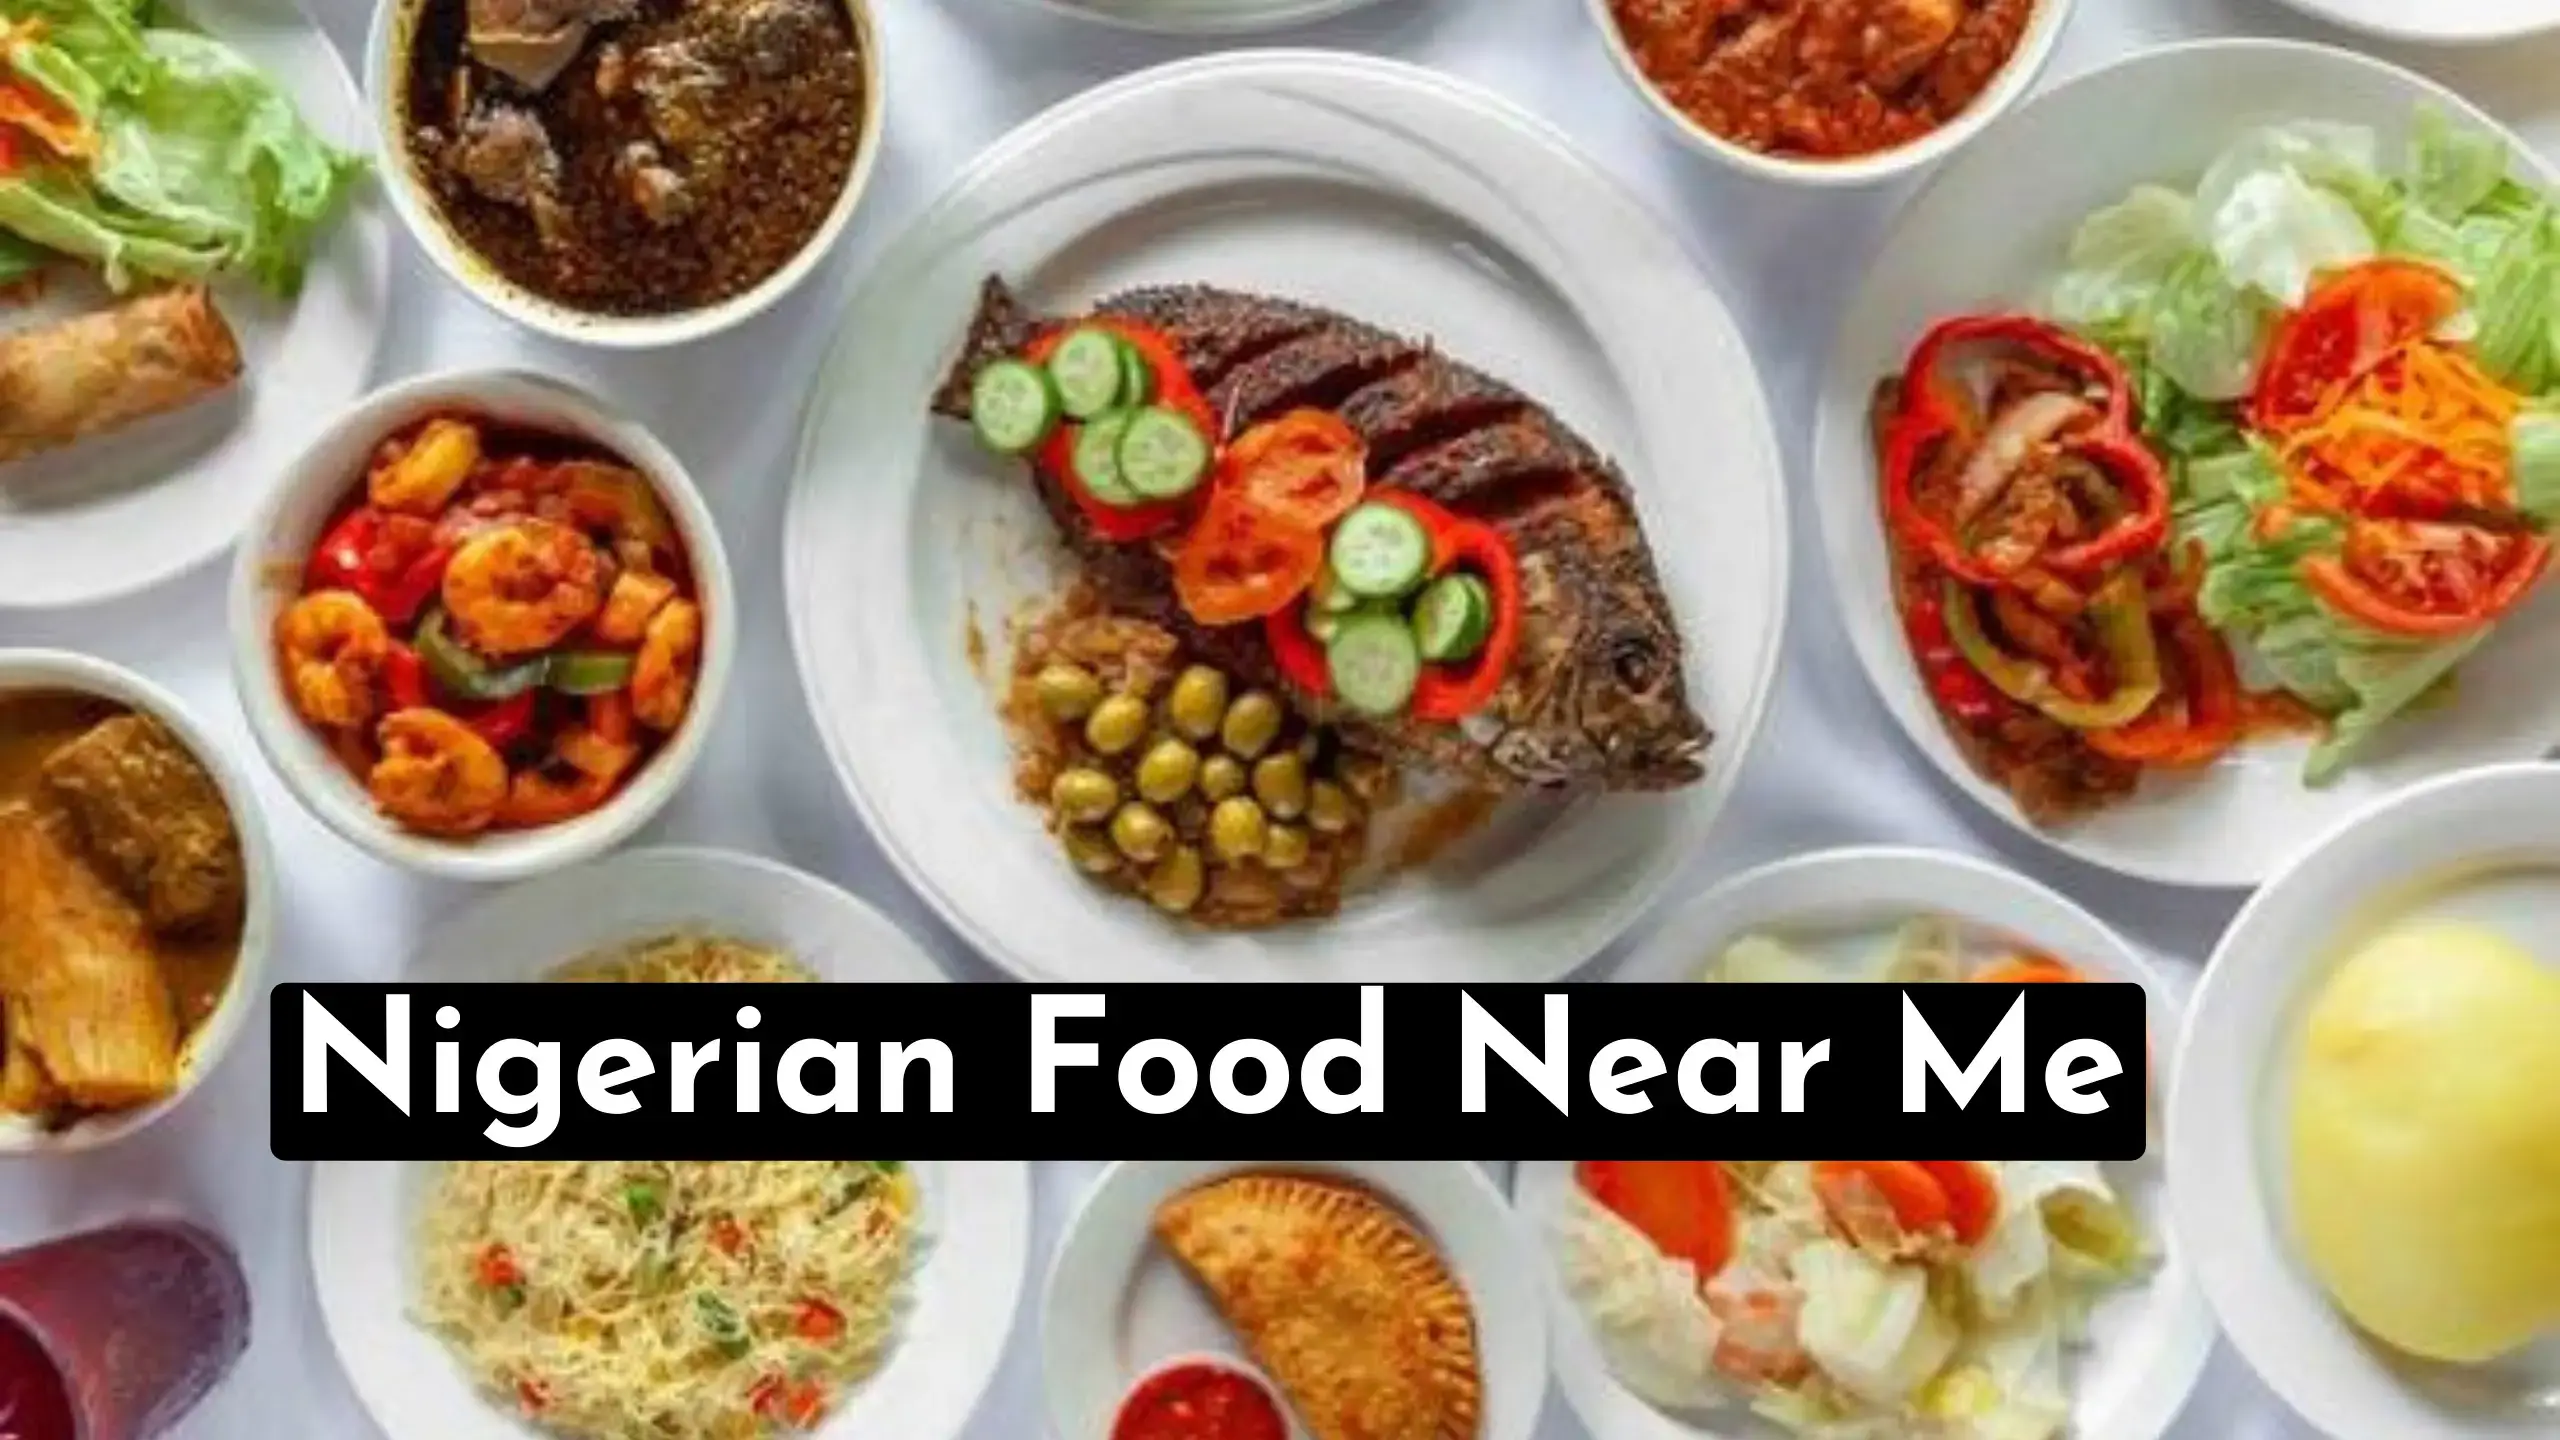 A Quick Guide To Find Nigerian Food Near Me Locations | Also Quickly Find The Best Nigerian Food Dishes With Health Benefits |open-near-me.com